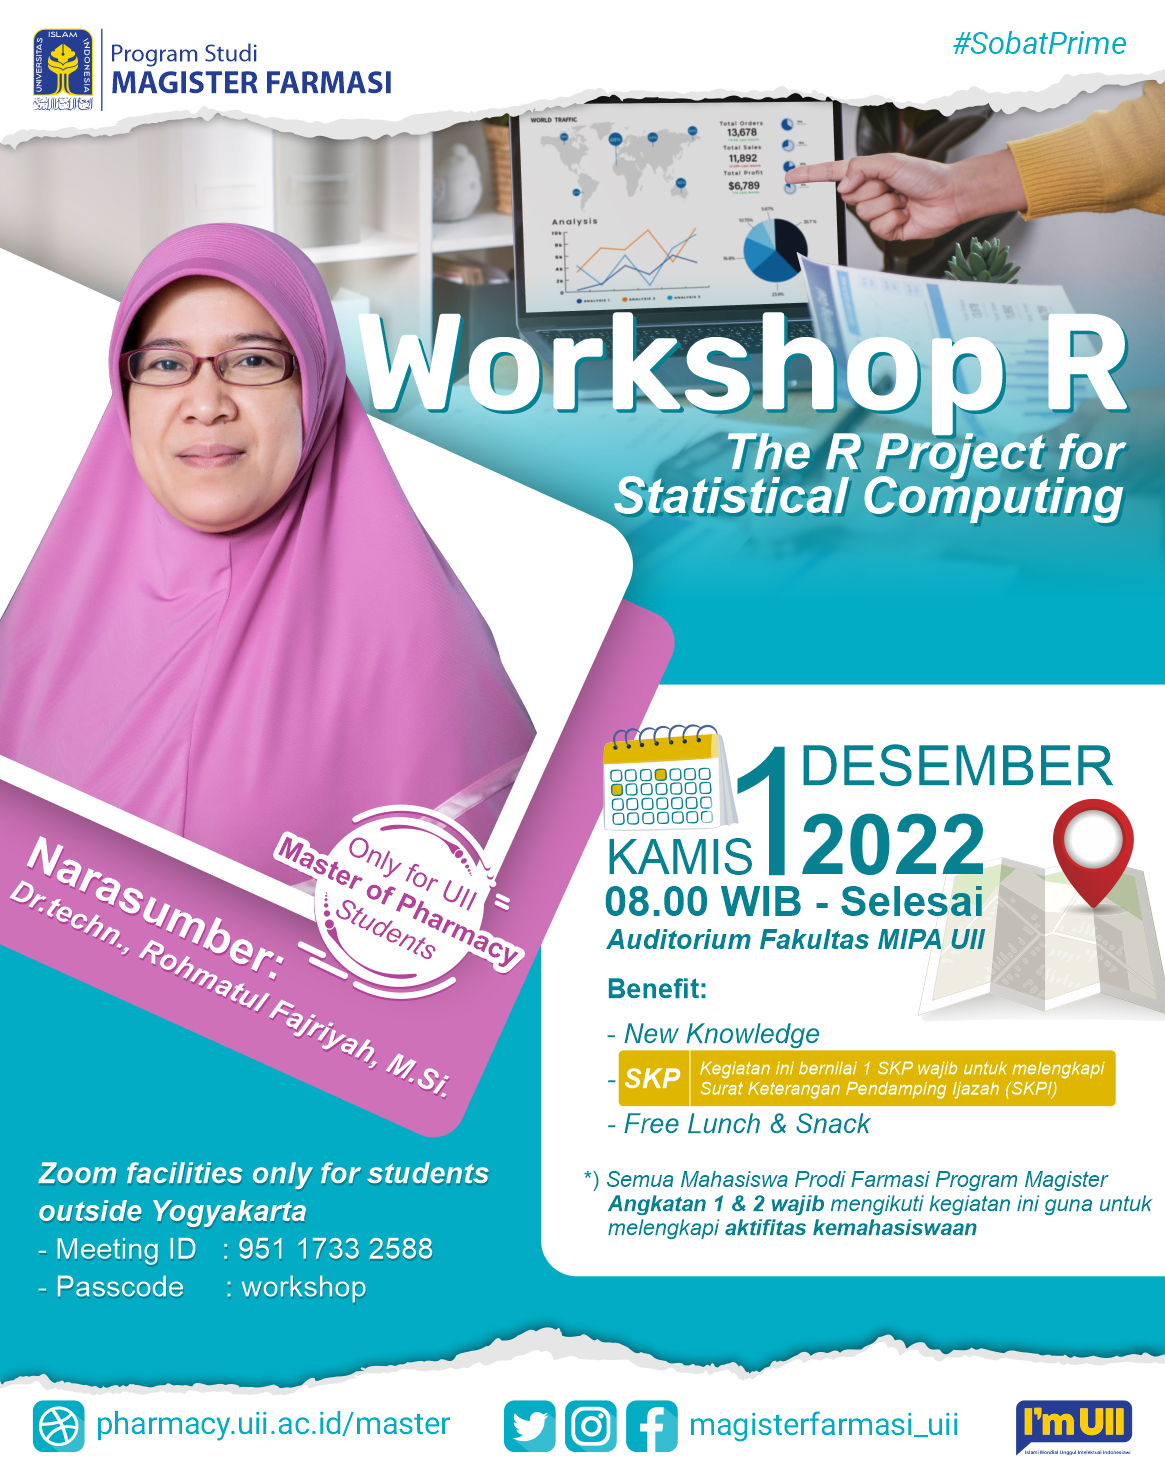 Workshop R “The R Project for Statistical Computing”